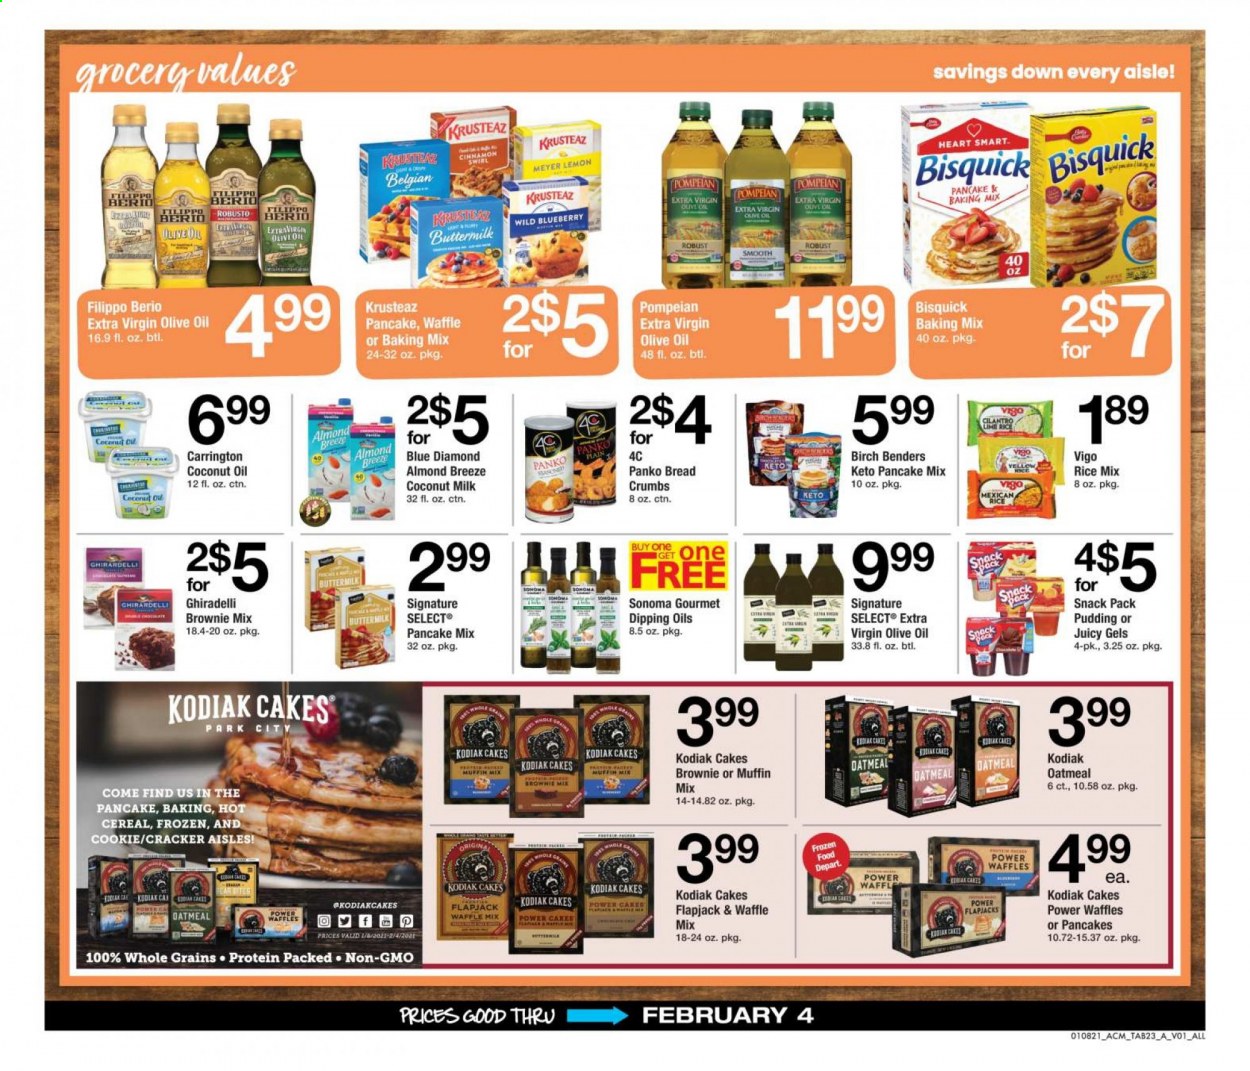 thumbnail - ACME Flyer - 01/08/2021 - 02/04/2021 - Sales products - bread, brownie mix, cake, pancakes, muffin, waffles, breadcrumbs, panko breadcrumbs, pudding, Almond Breeze, buttermilk, crackers, Ghirardelli, Bisquick, oatmeal, coconut milk, cereals, rice, cilantro, coconut oil, extra virgin olive oil, olive oil, Blue Diamond. Page 23.